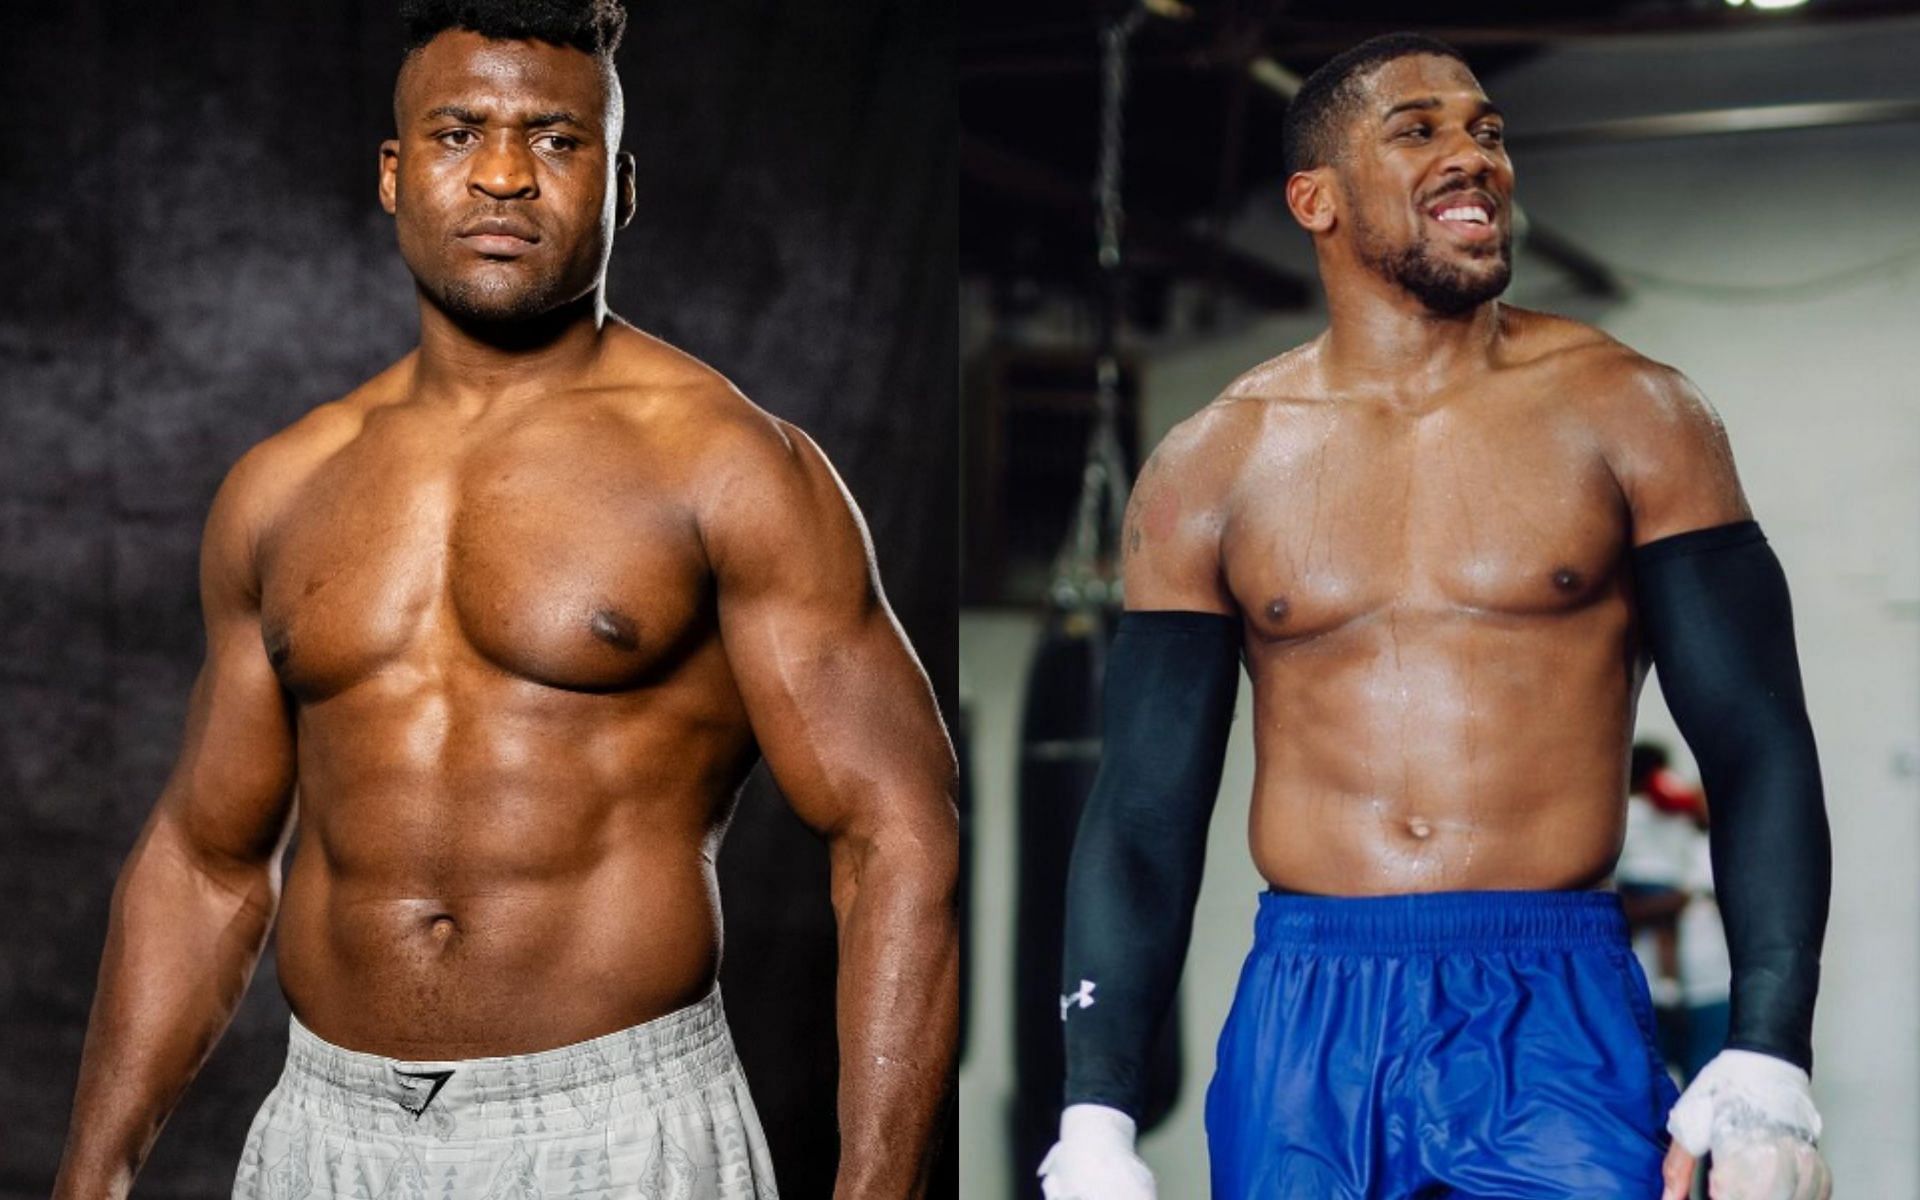 Francis Ngannou and Anthony Joshua will clash in March. [Images via @FrancisNgannou and @AnthonyJoshua on Instagram]